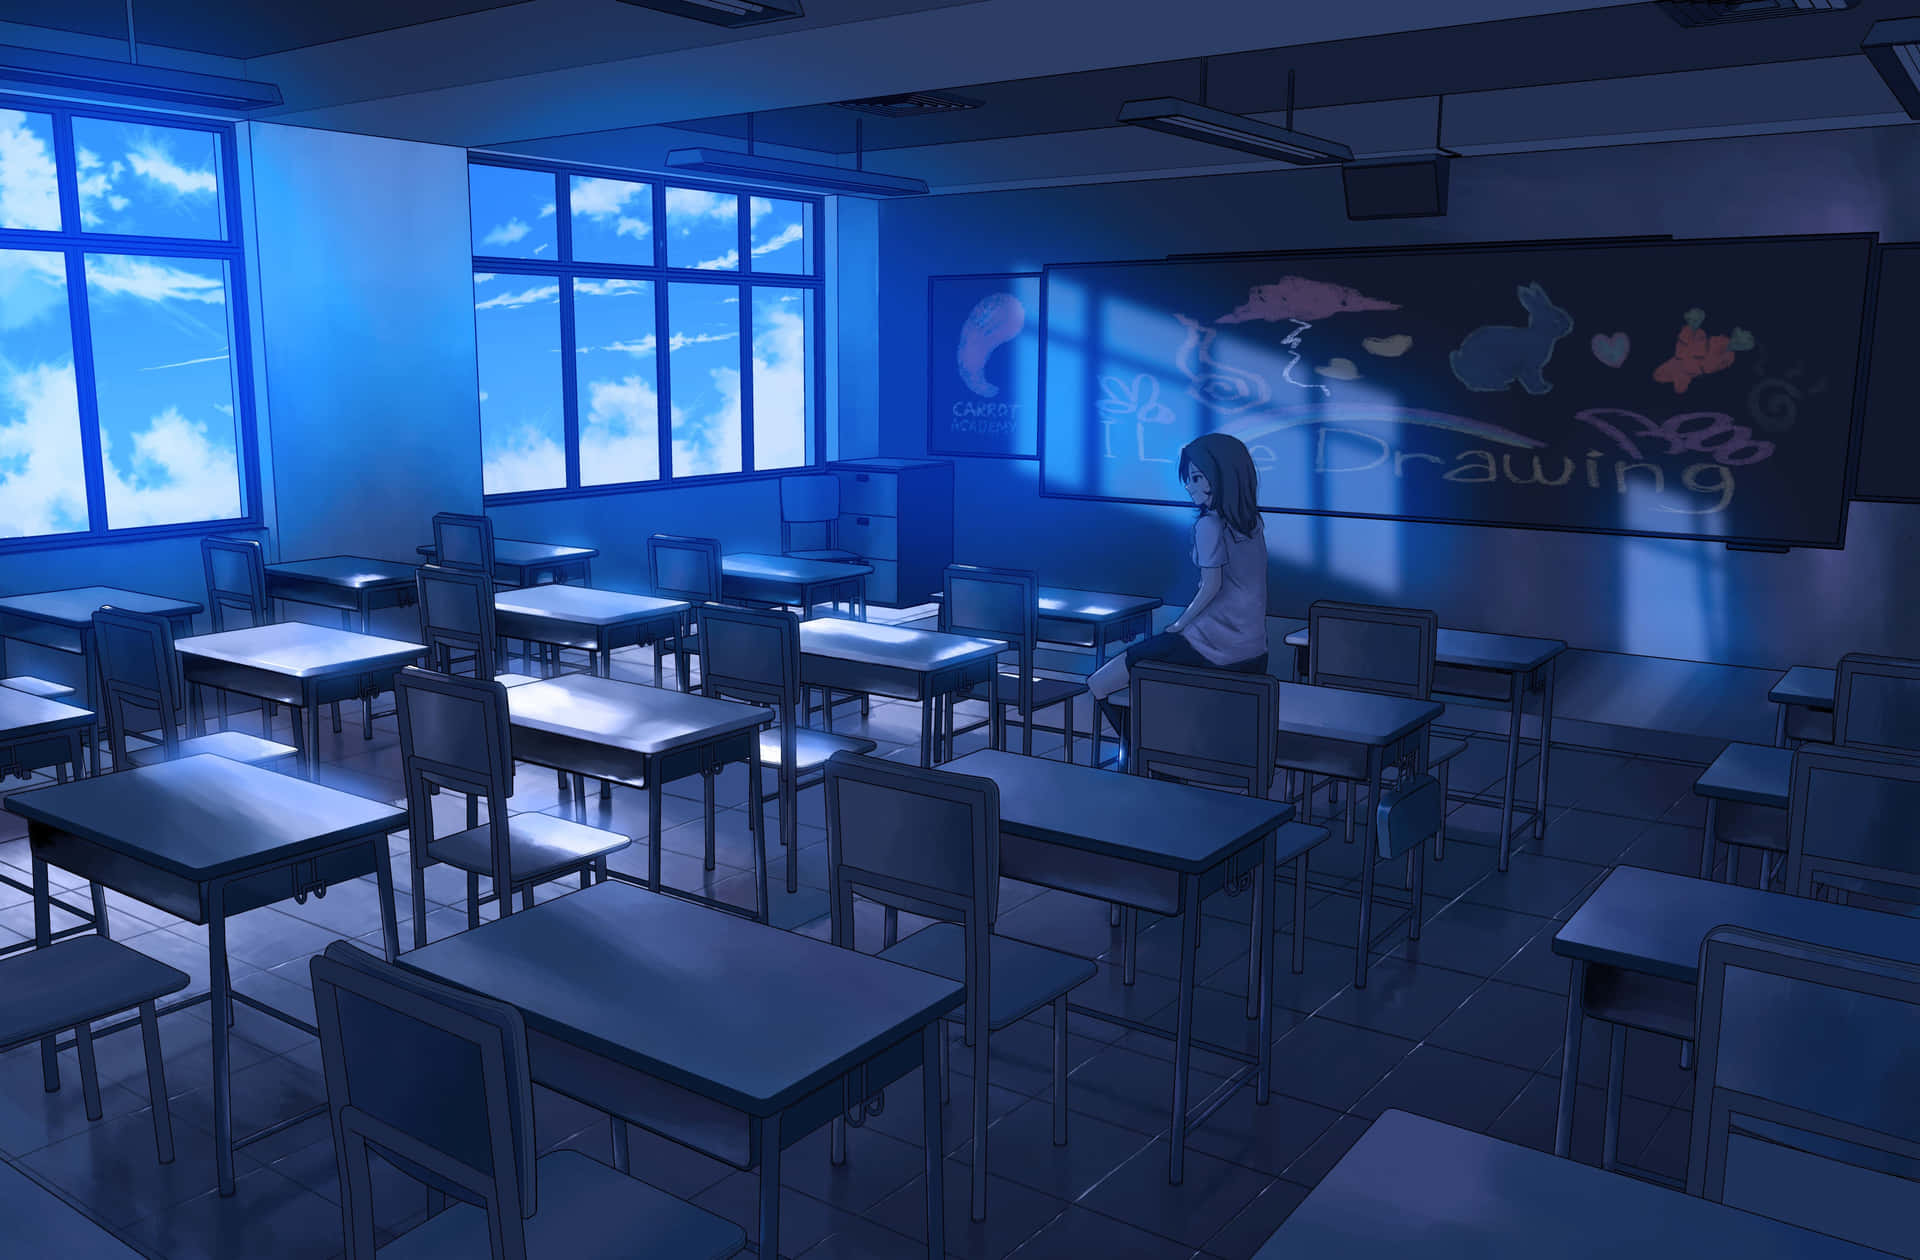 Dive into a world of Anime with this Anime Classroom background